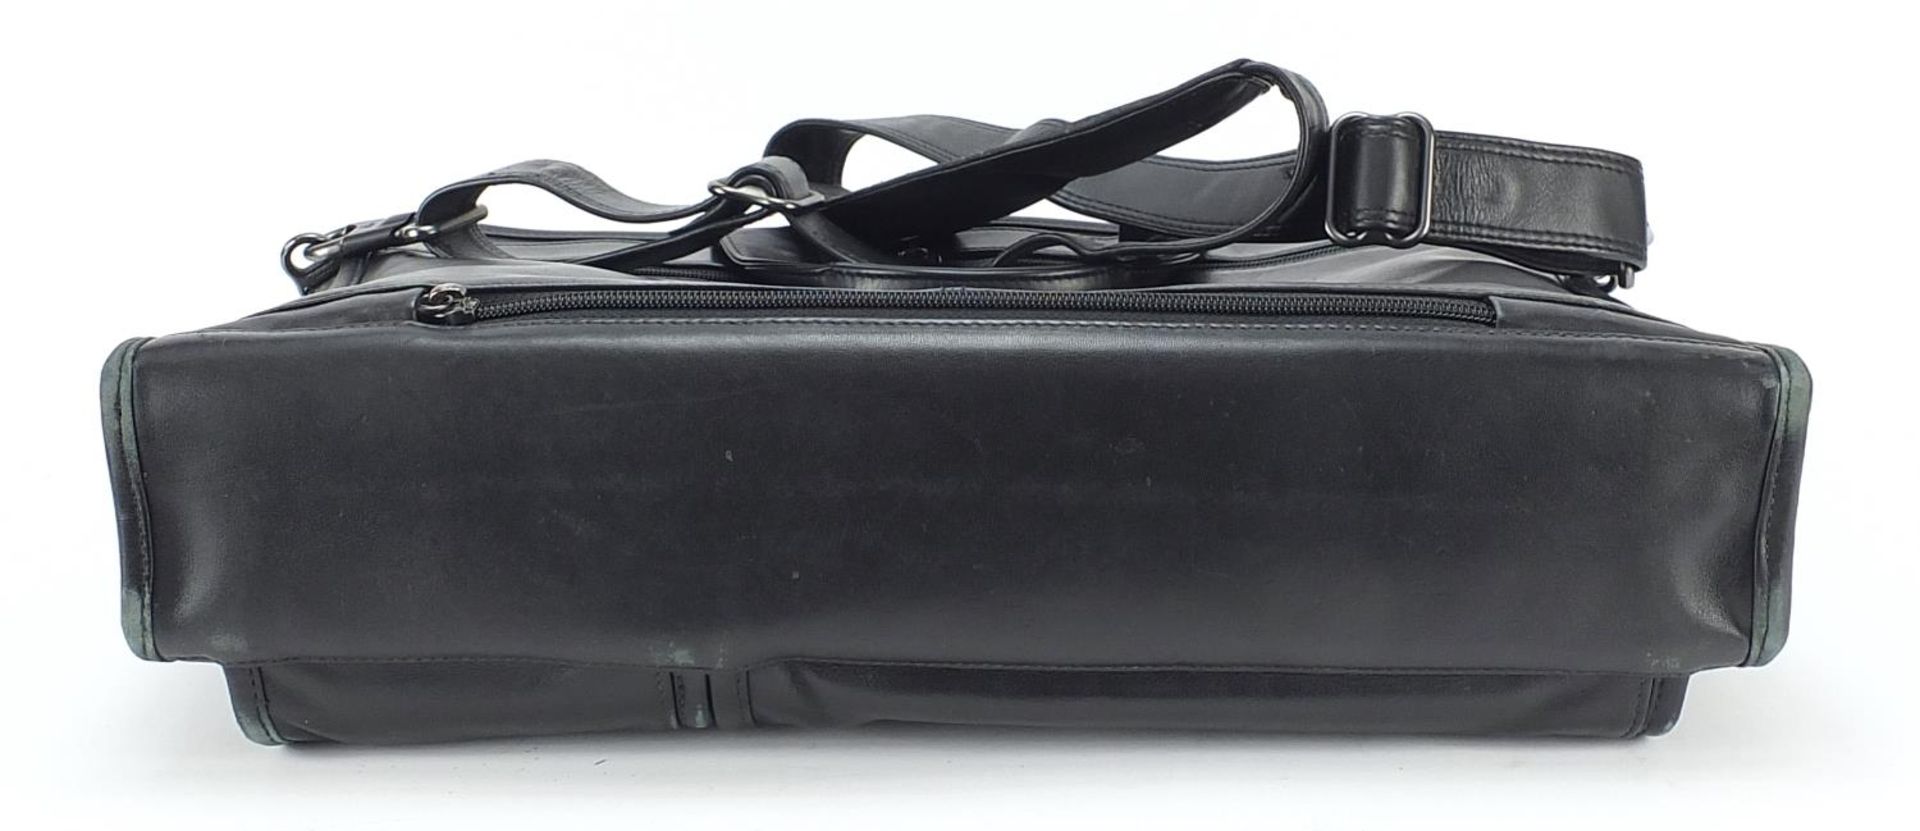 Tumi leather laptop briefcase, 47cm wide - Image 5 of 5